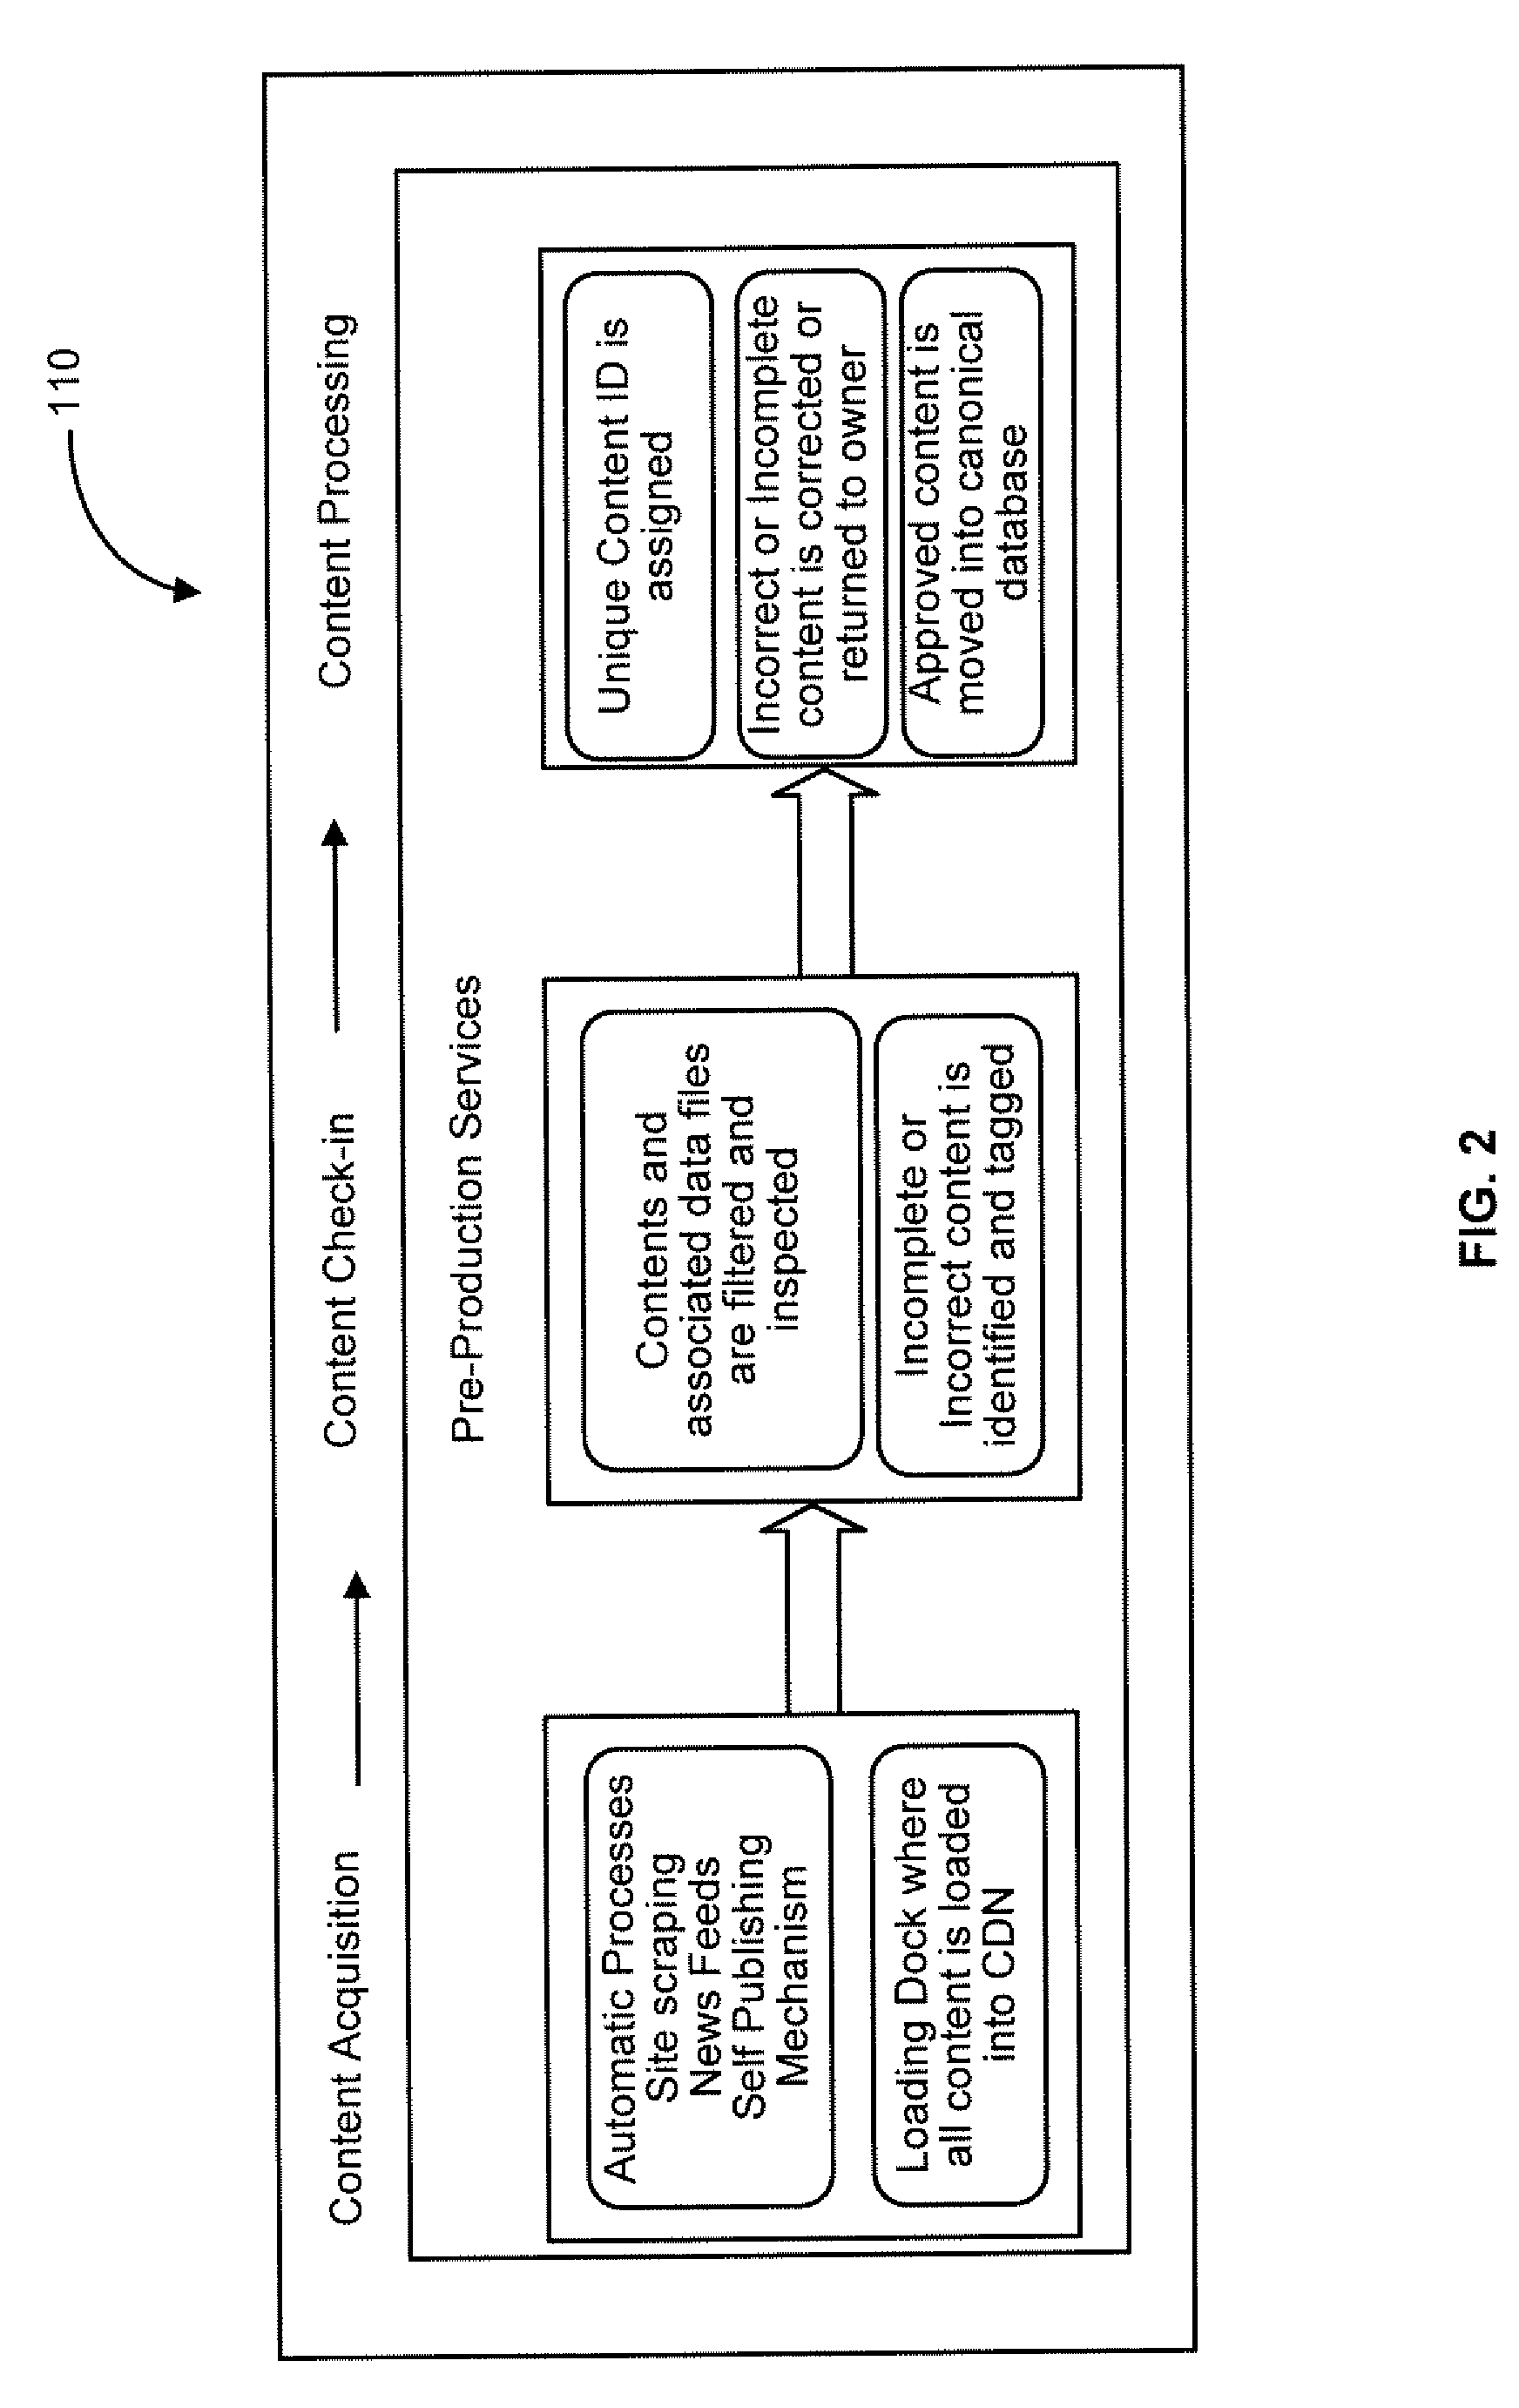 Systems, methods and apparatus for content distribution